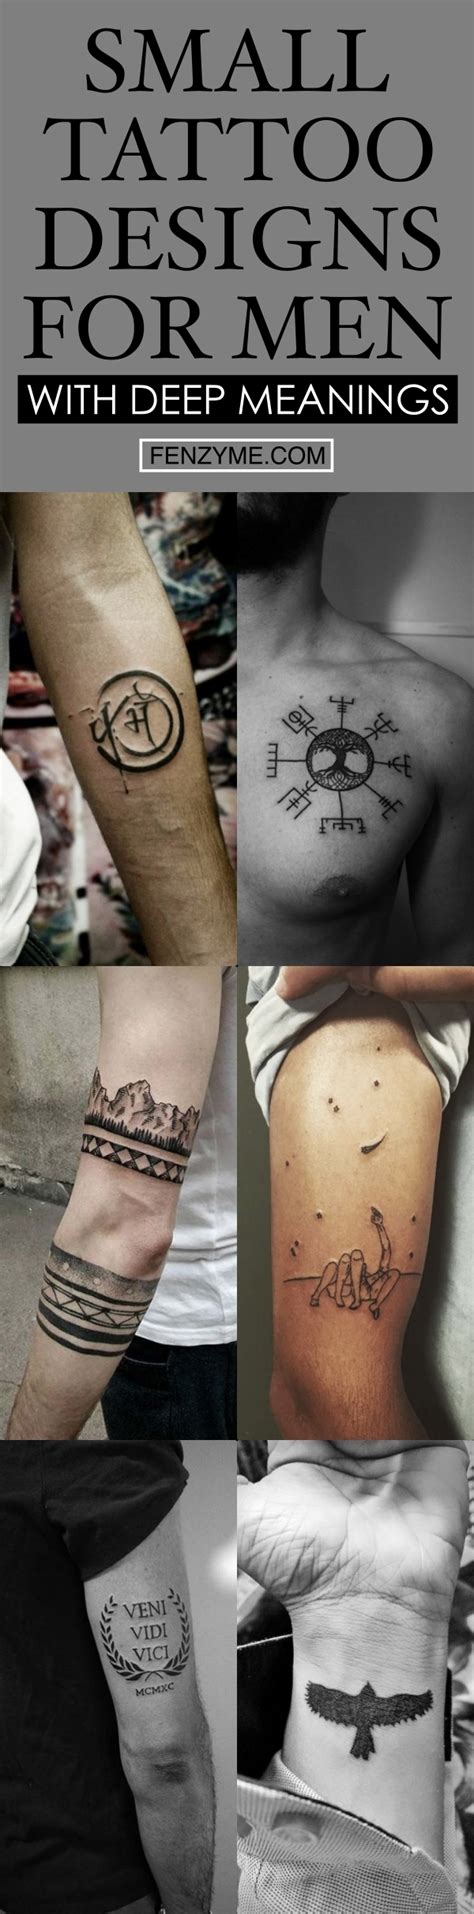 Small Tattoos For Men With Meaning 55 Small Tattoo Designs For Men With Deep Meanings Young